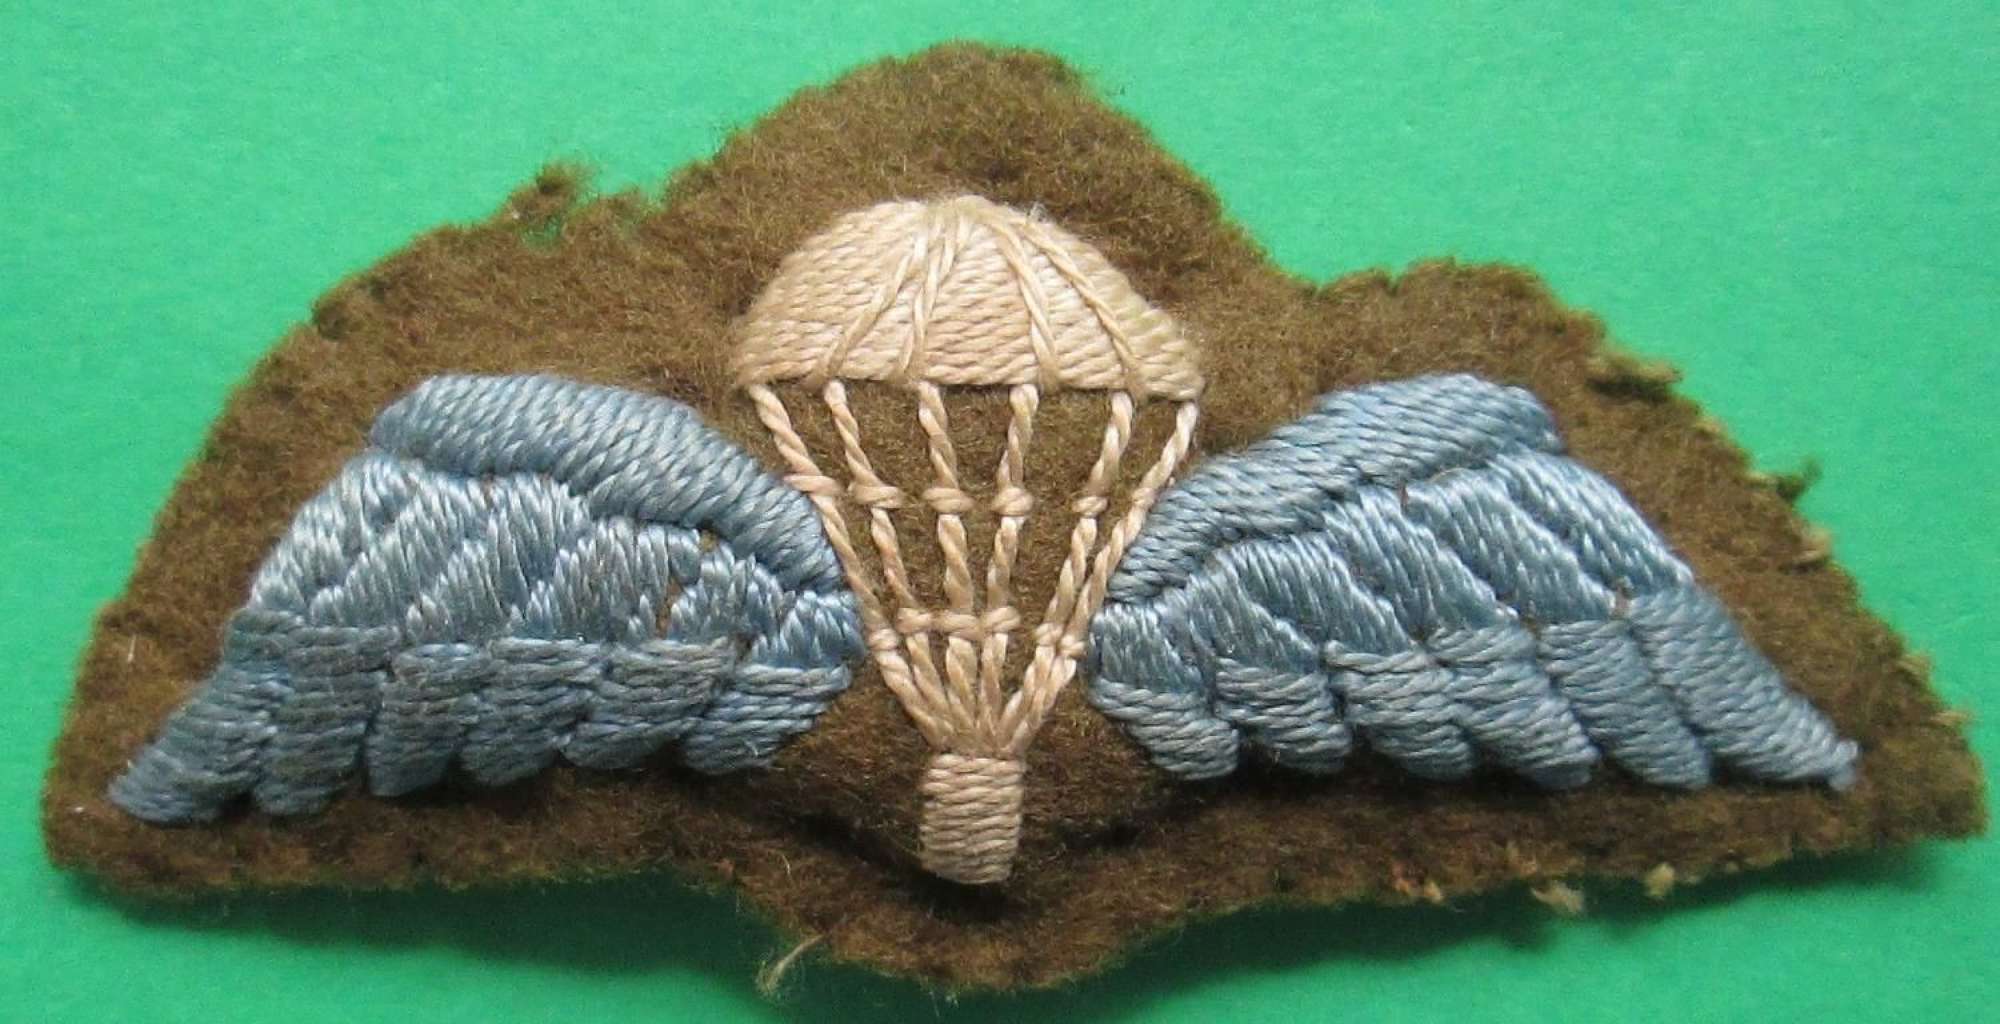 A VERY GOOD PADDED OFFICER STYLE PARACHUTE JUMP WING